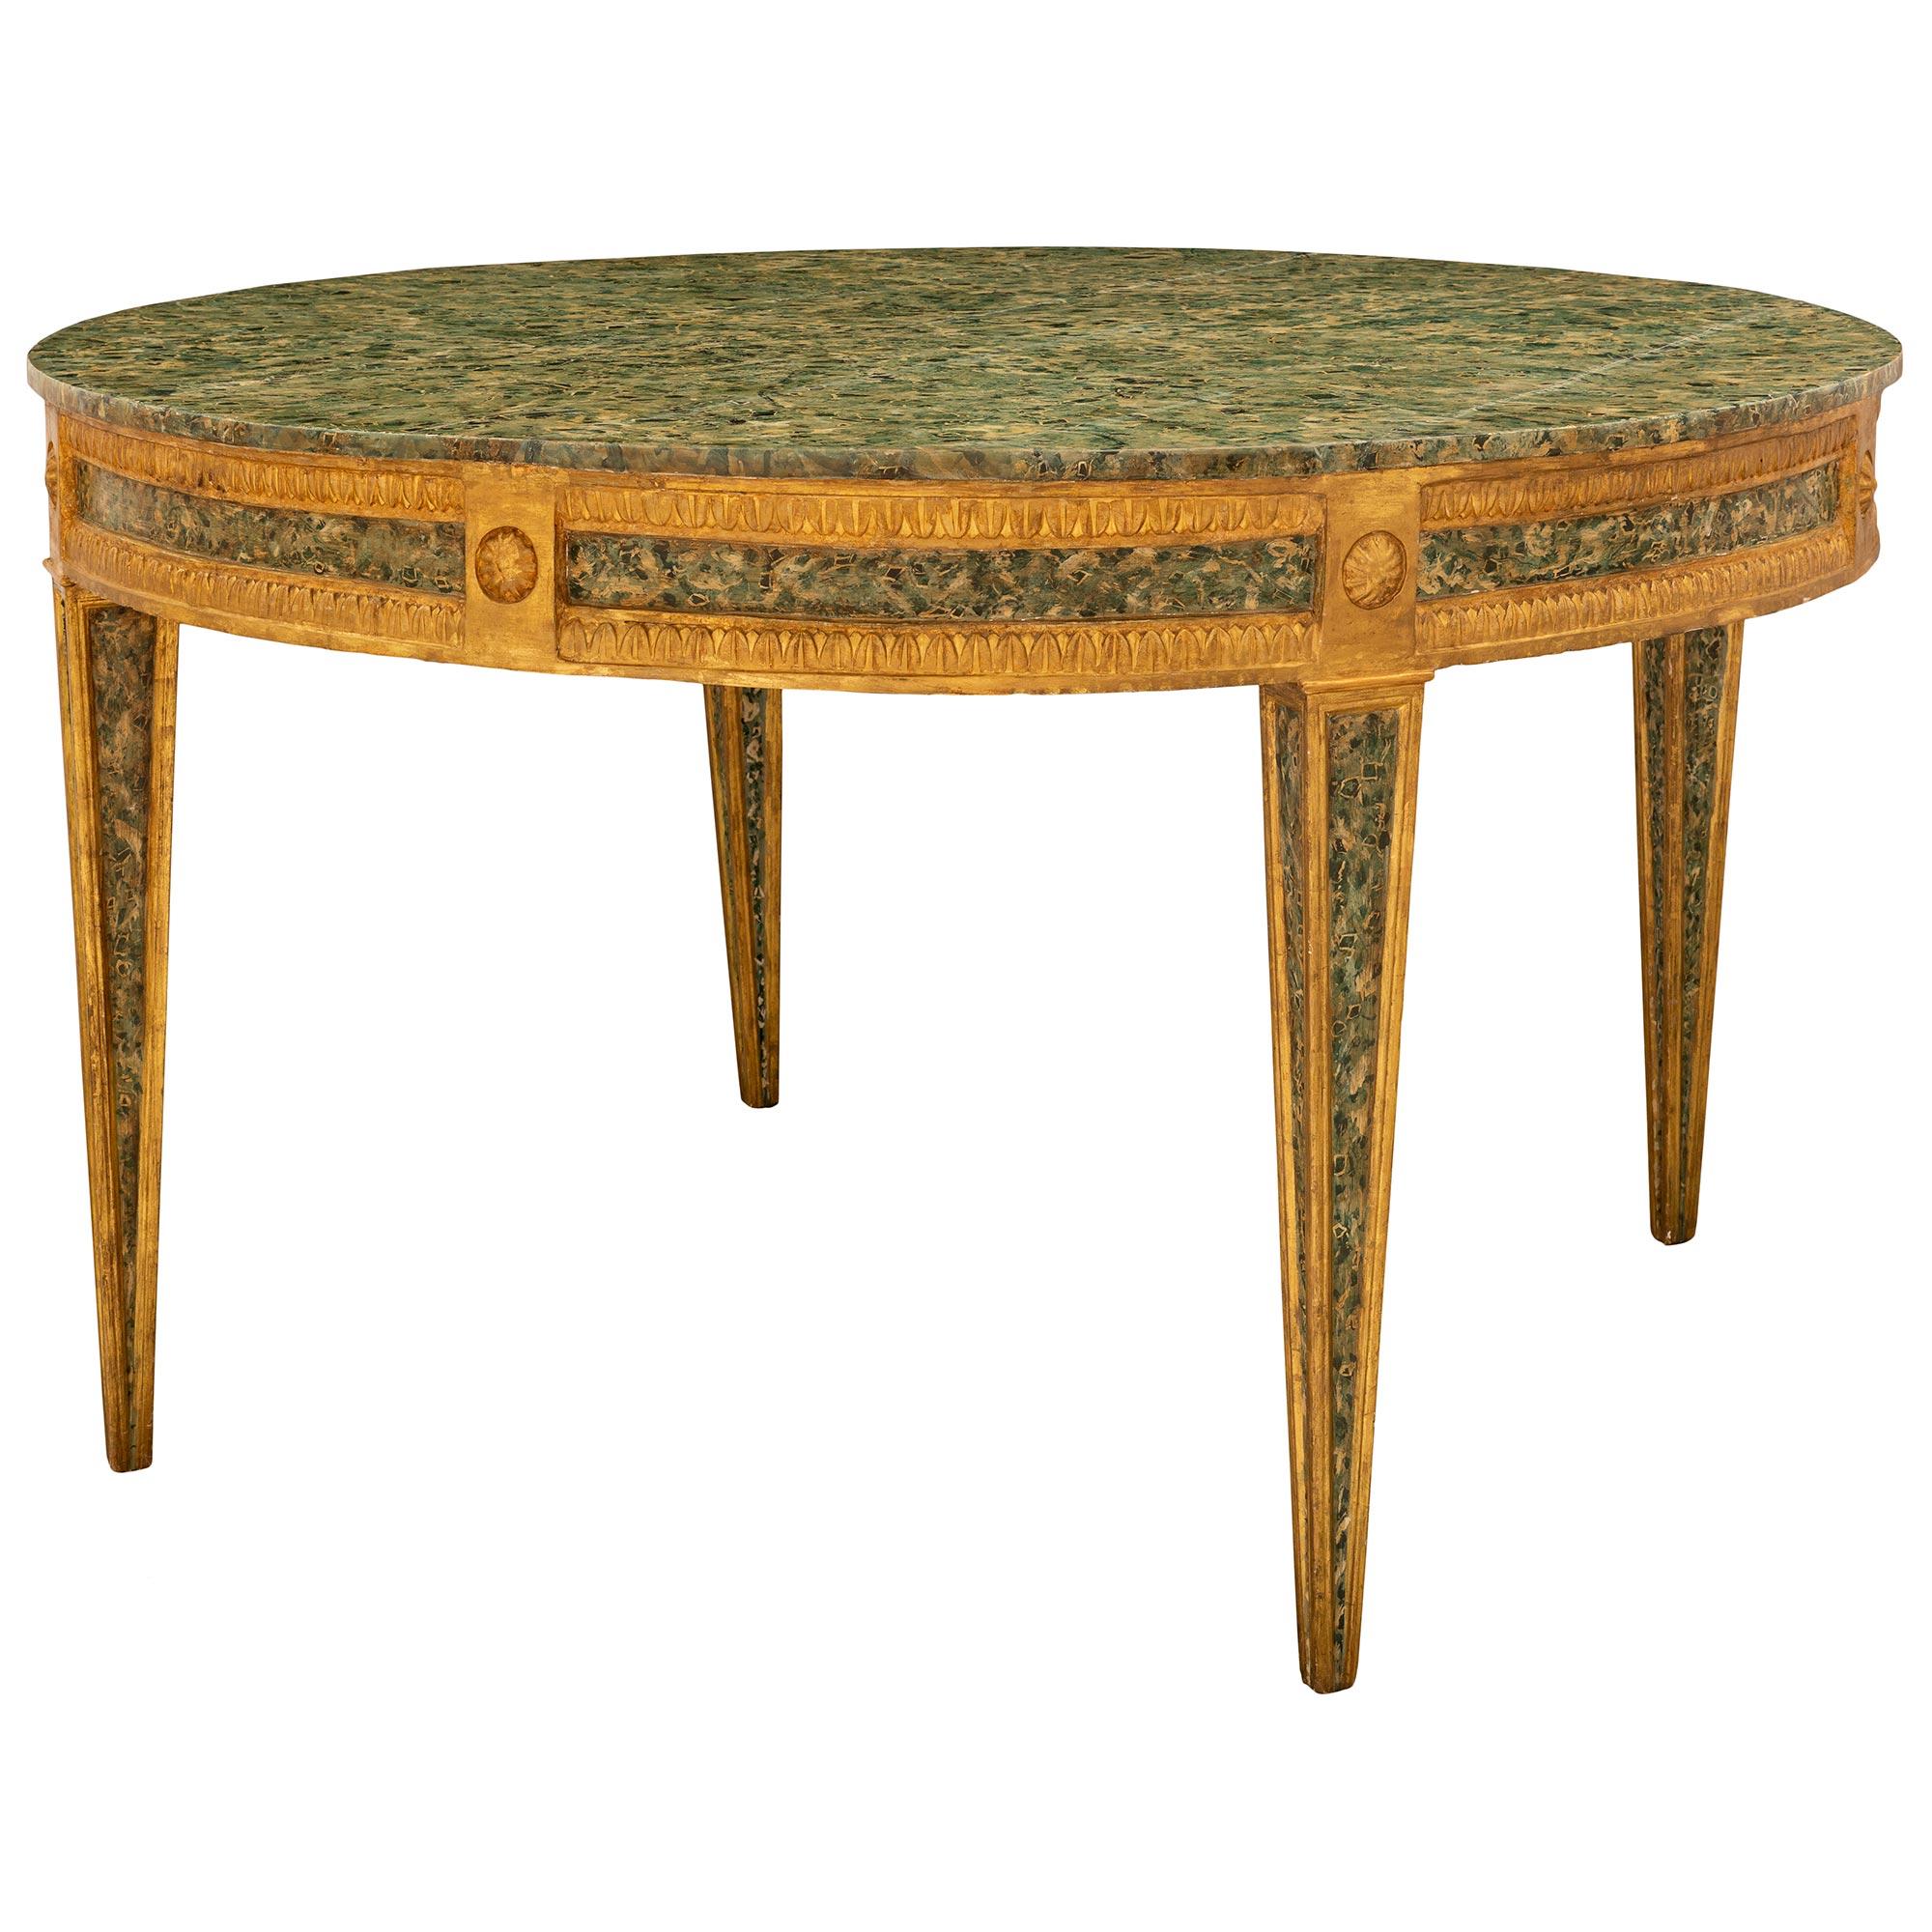 A sensational and exceptionally well executed Italian 18th century Louis XVI period giltwood and faux painted marble center table. The circular table is raised by impressive square tapered legs finished on all sides with beautiful recessed faux